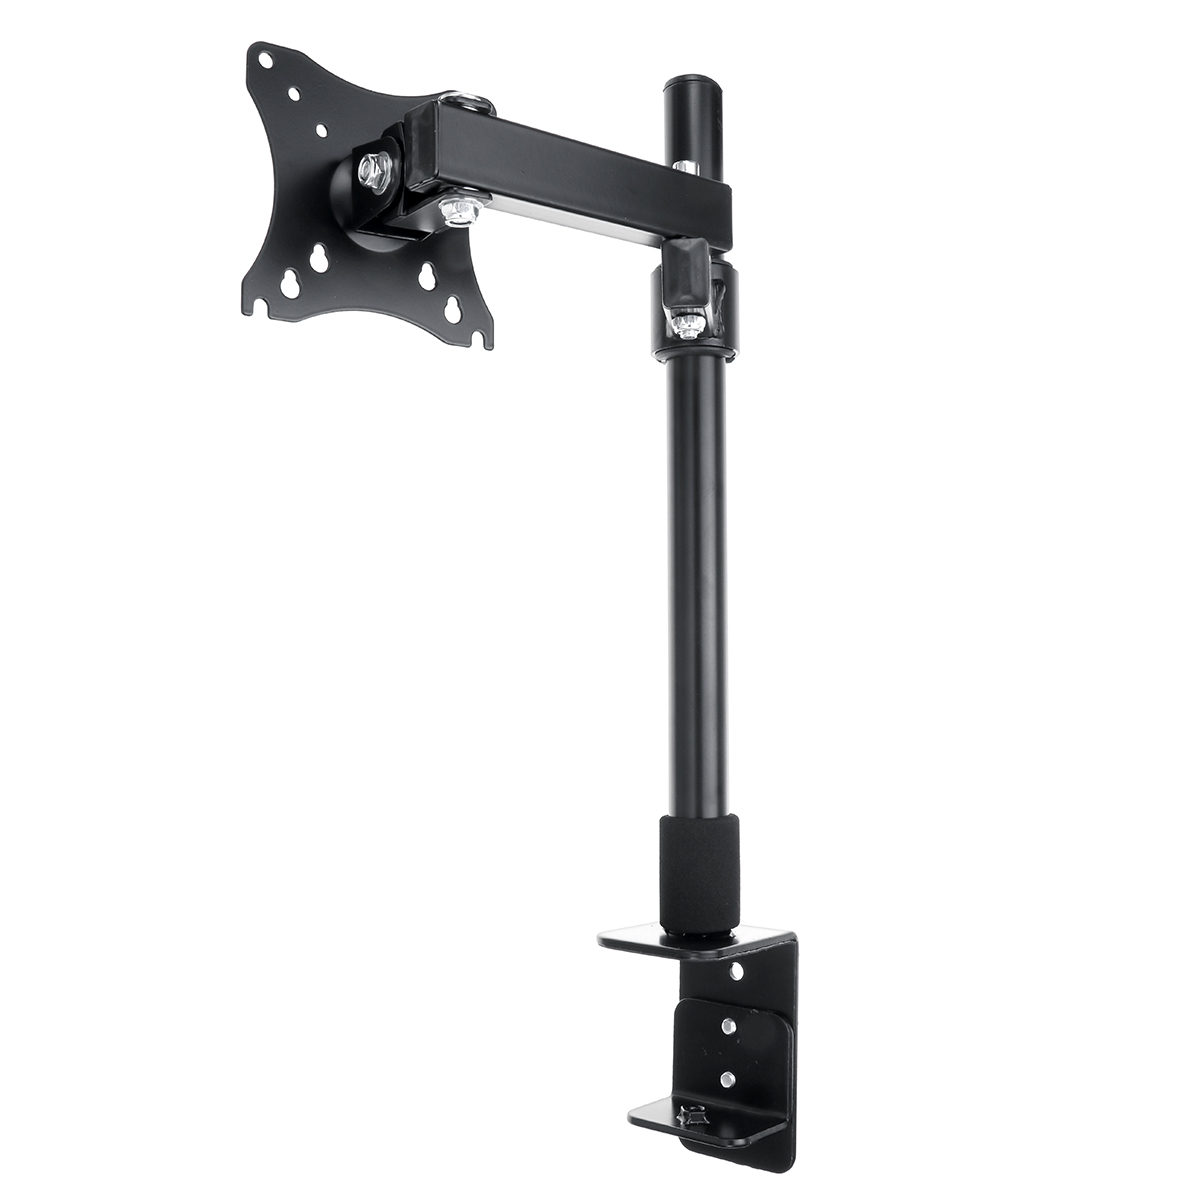 Single-Arm-Desk-Mount-LCD-Computer-Monitor-Bracket-Clamp-Stand-14-27-inch-Screen-TV-Bracket-1900409-3